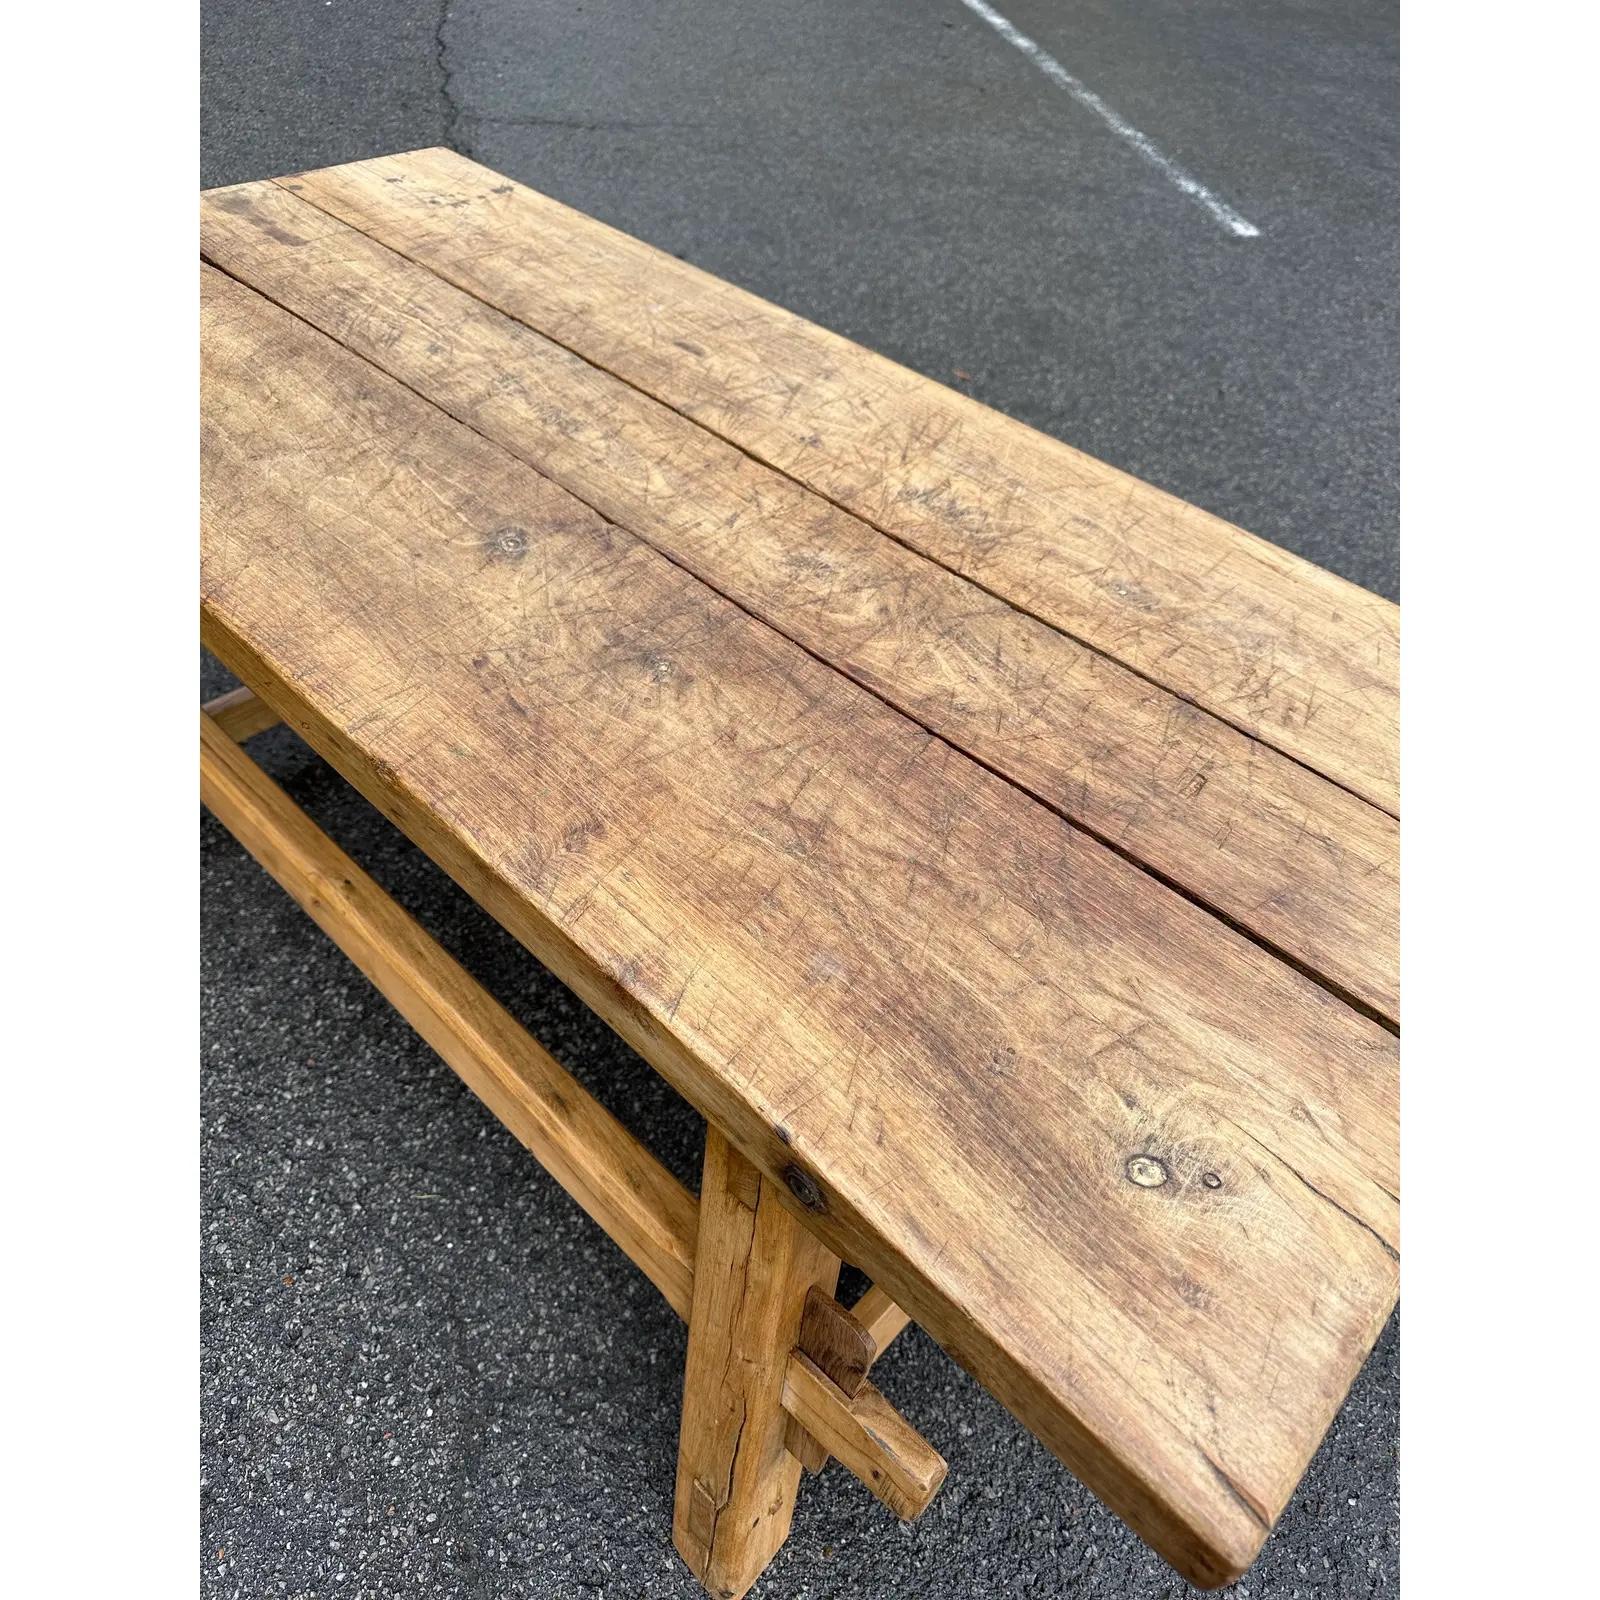 This 19th century coffee table is simple yet beautiful! This piece was orginial used as a butcher's chopping table and has been since cut down to coffee table size. The years of use have created great patina as well as unique detail on the top. The